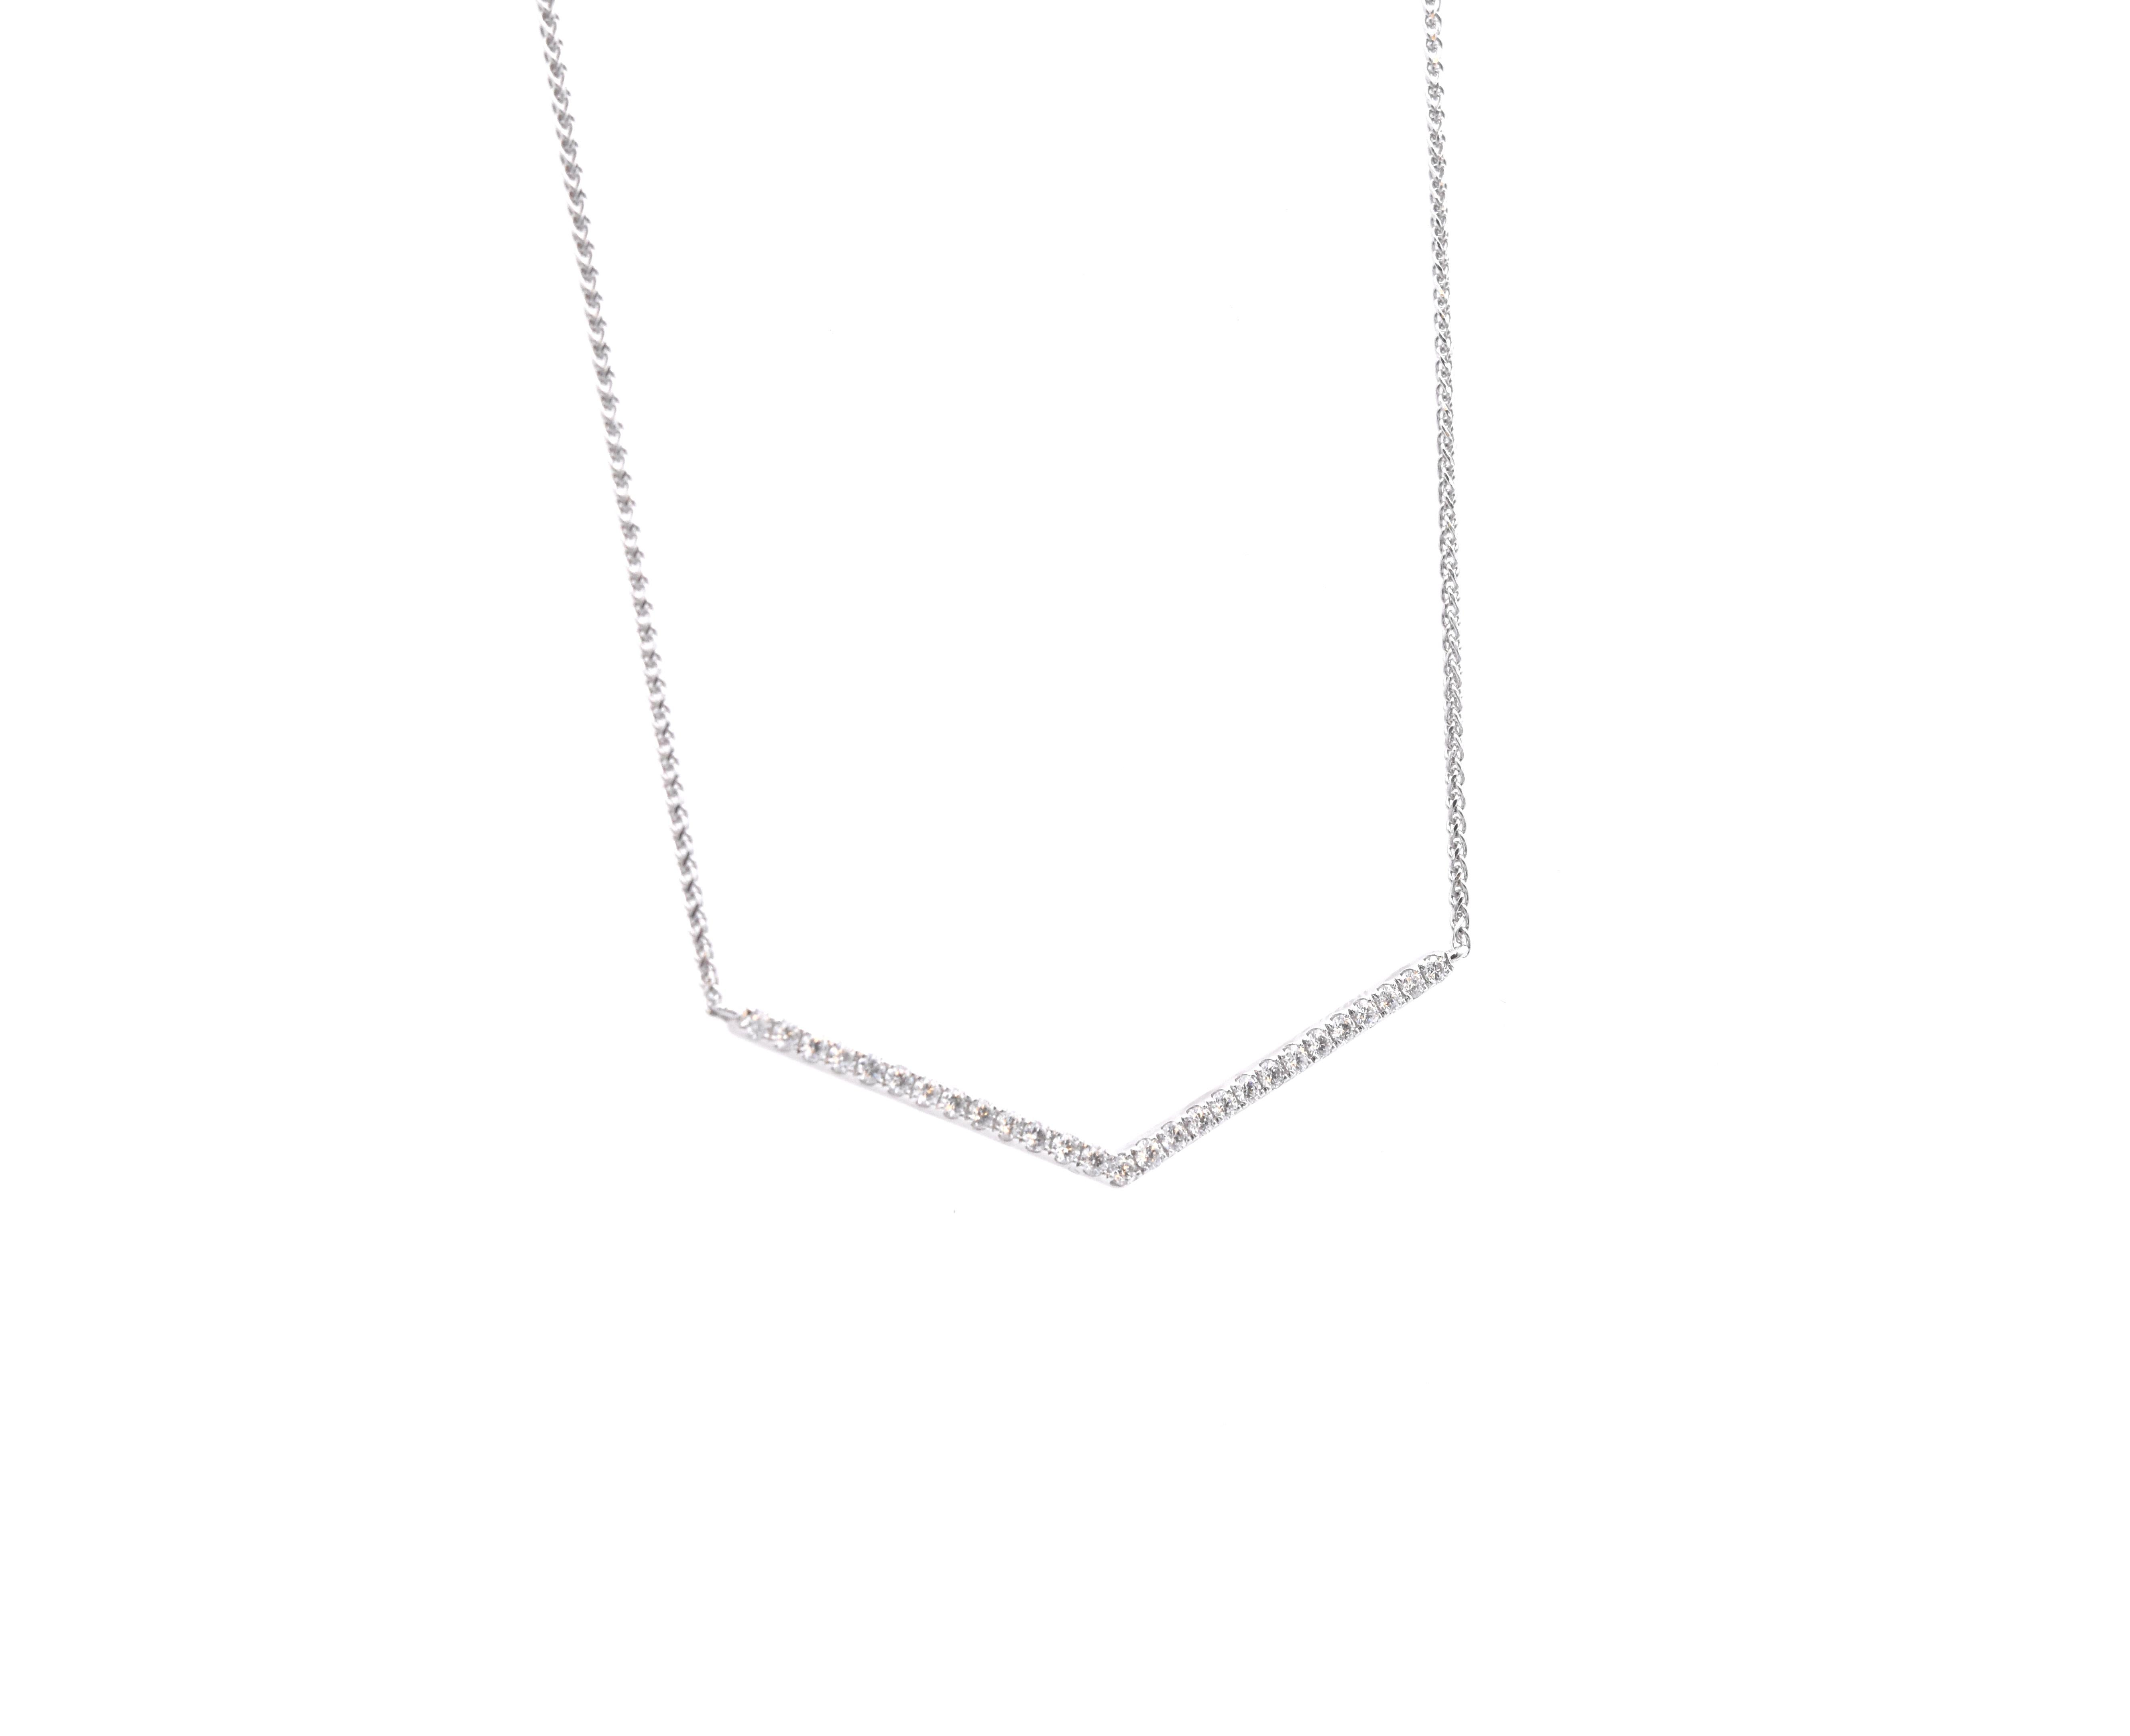 Material: 18k white gold
Diamonds: 27 round brilliant cuts = 0.52cttw
Color: G
Clarity: VS
Dimensions: necklace measures 16-inches in length
Weight: 5.05 grams
